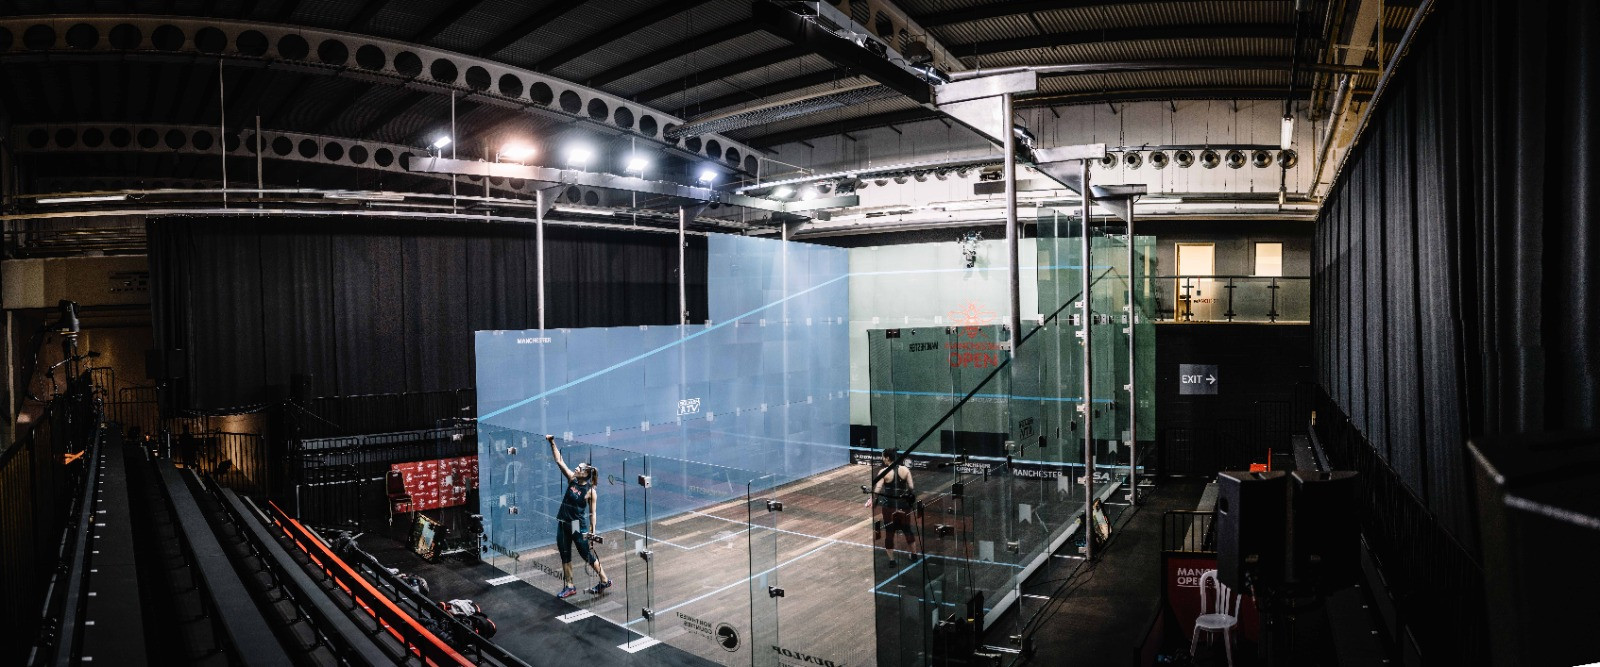 Next week's Manchester Open will be held behind closed doors ©PSA